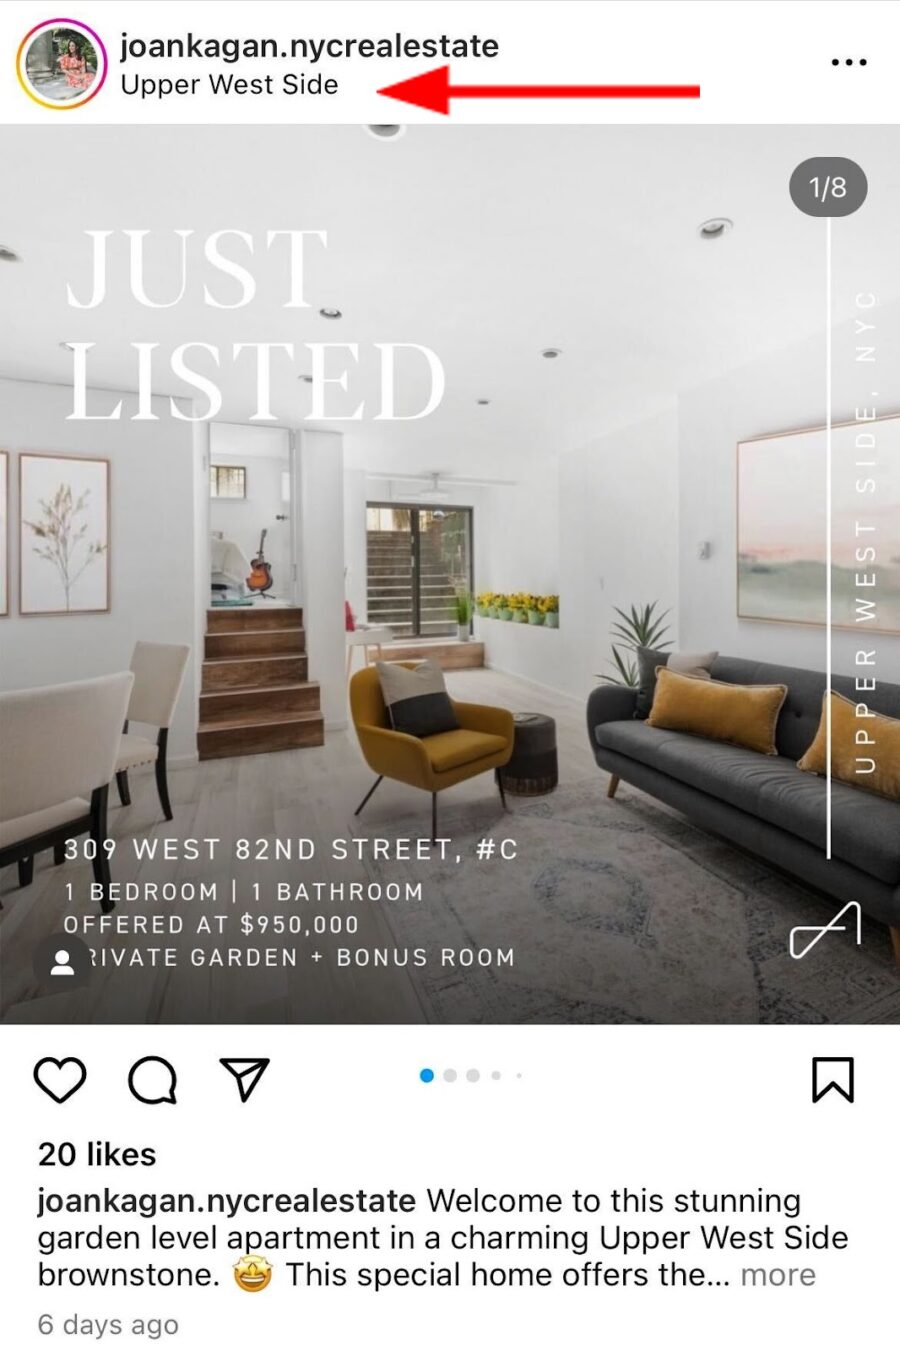 Instagram post of a just listed apartment on the Upper West Side in Manhattan, New York.